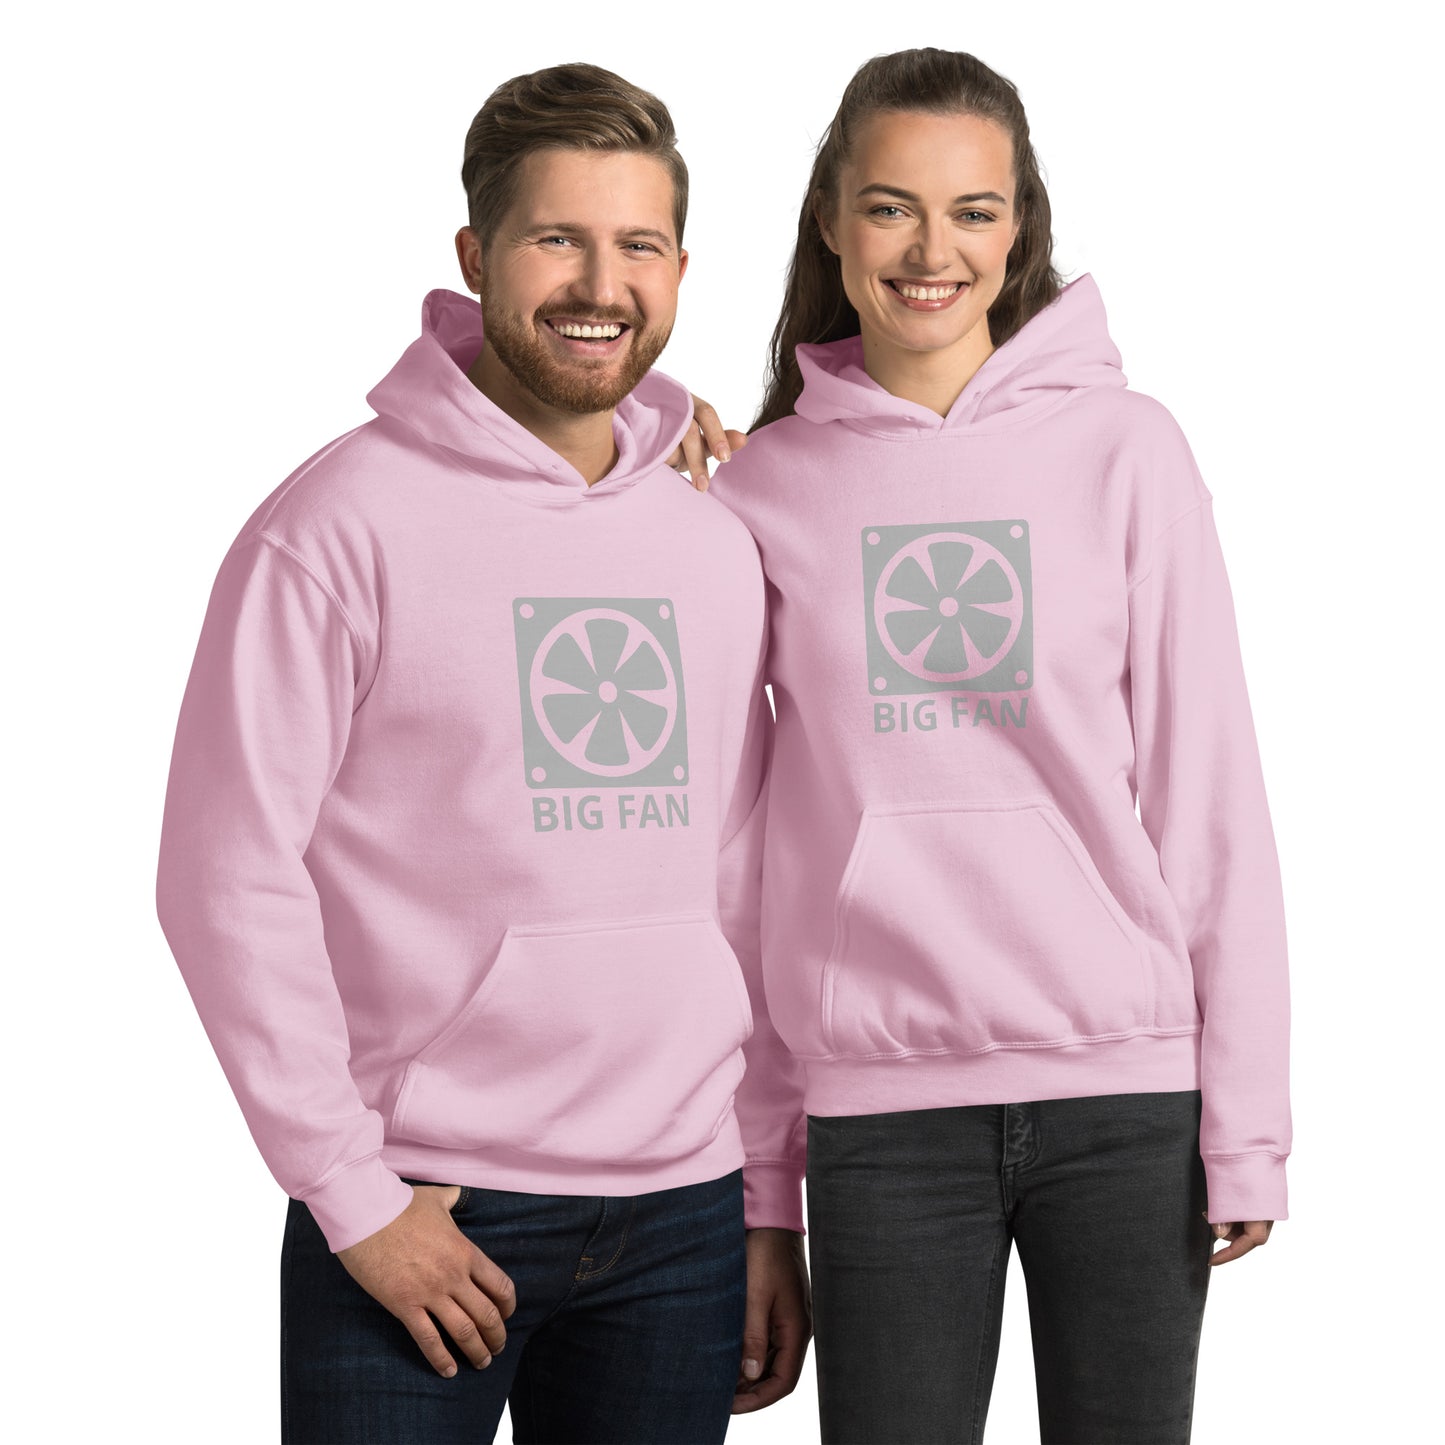 Man and women with pink hoodie with image of a big computer fan and the text "BIG FAN"